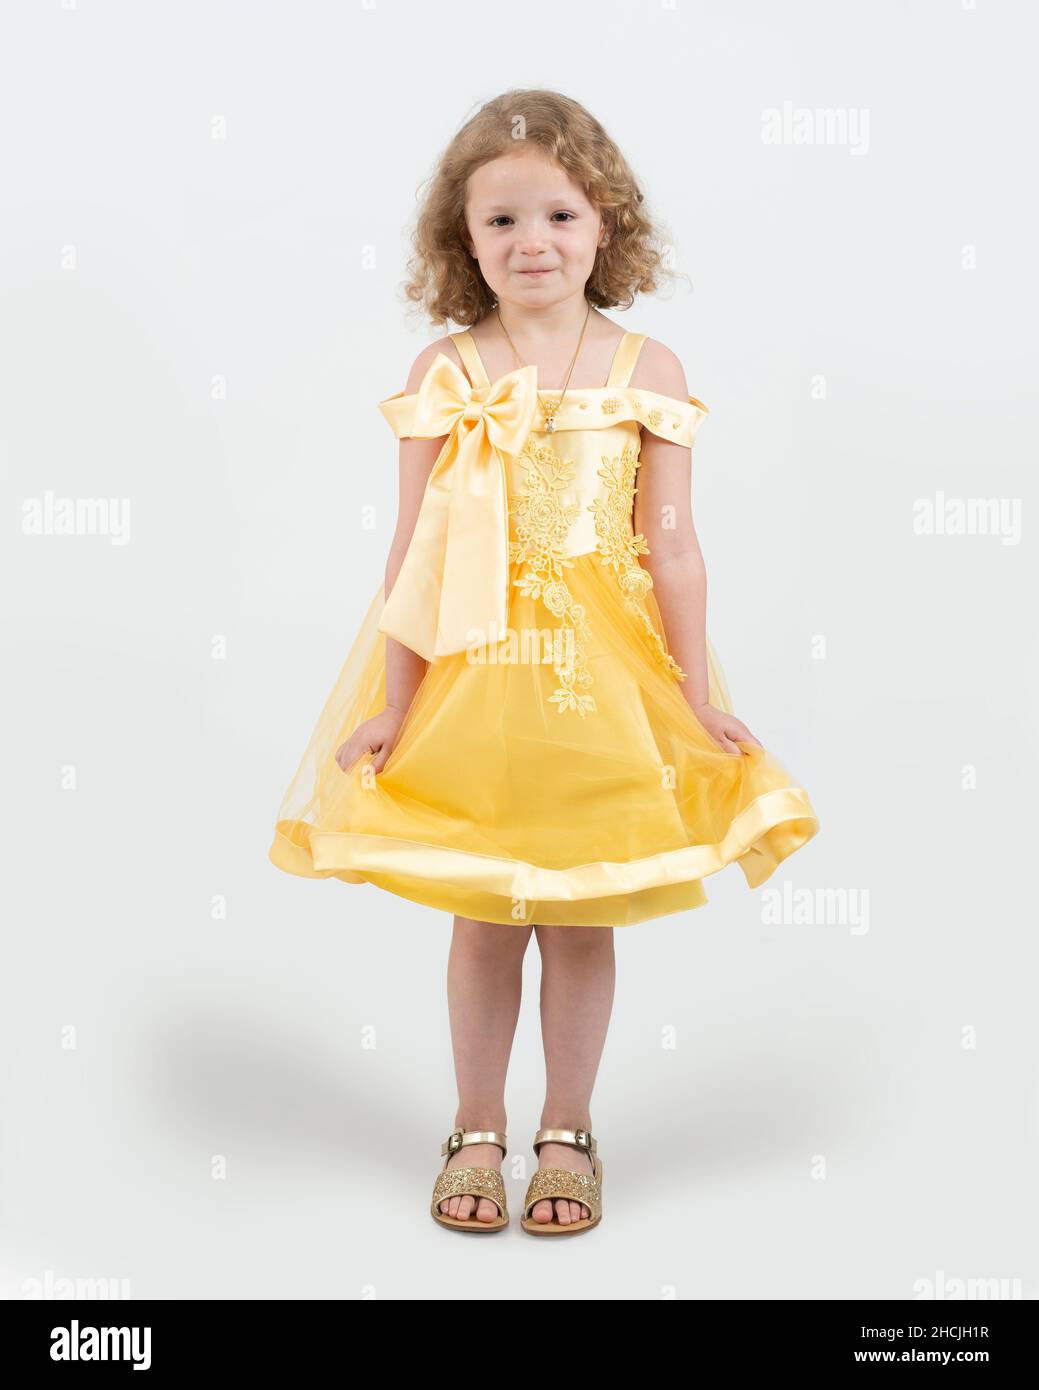 full length portrait of 4 or 5 year old girl, smiling, white background, in dressup dress Stock Photo